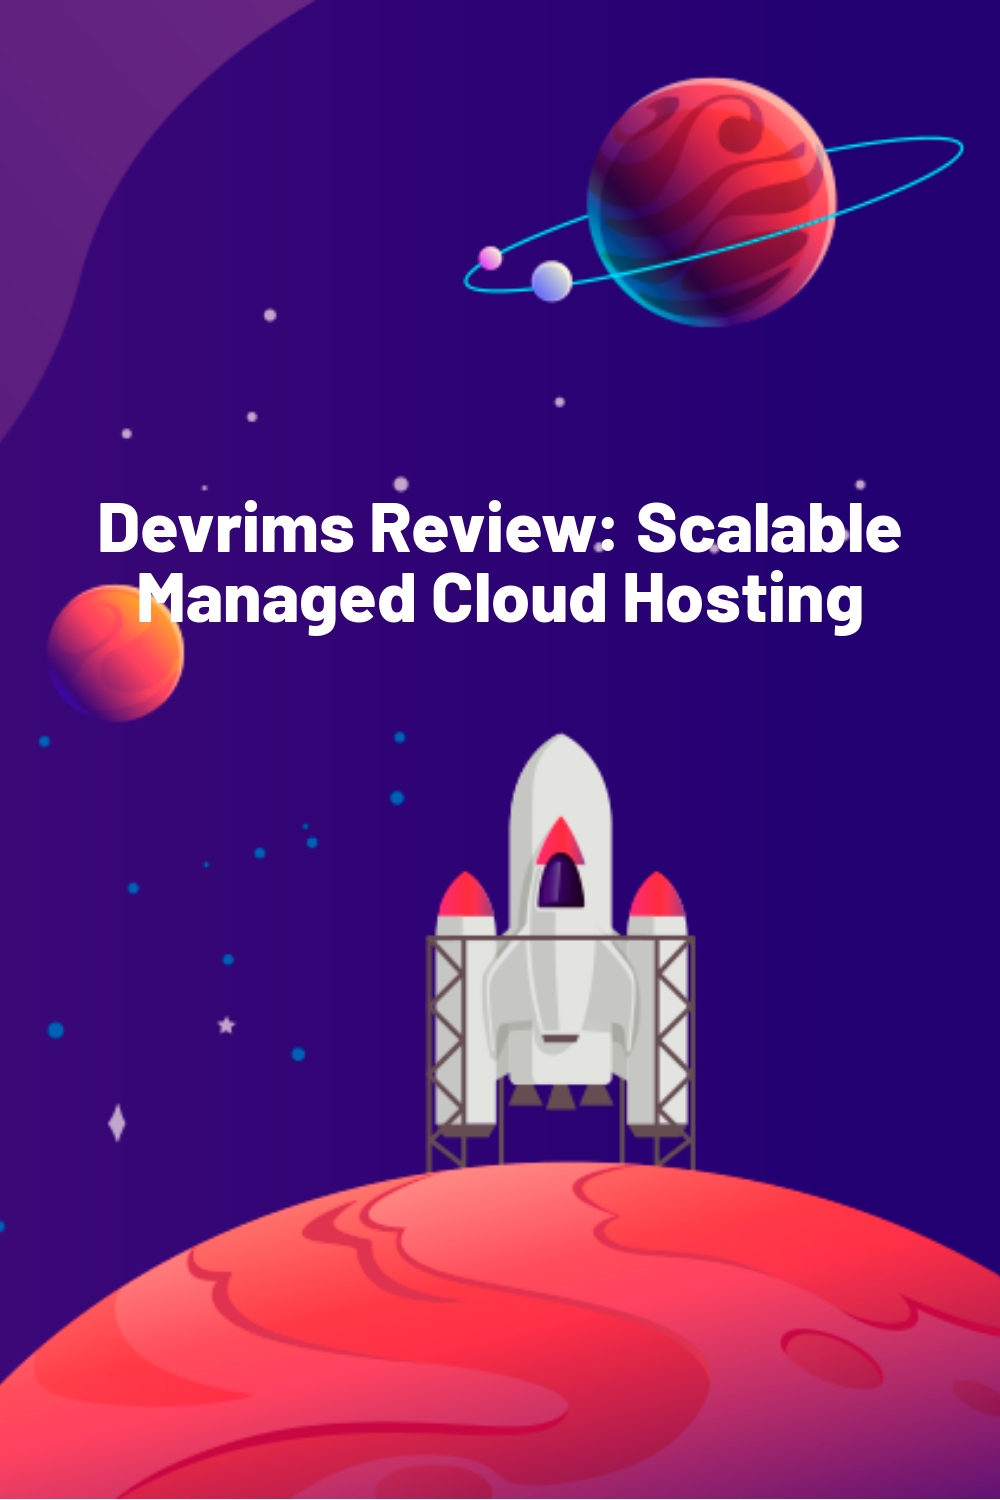 Devrims Review: Scalable Managed Cloud Hosting